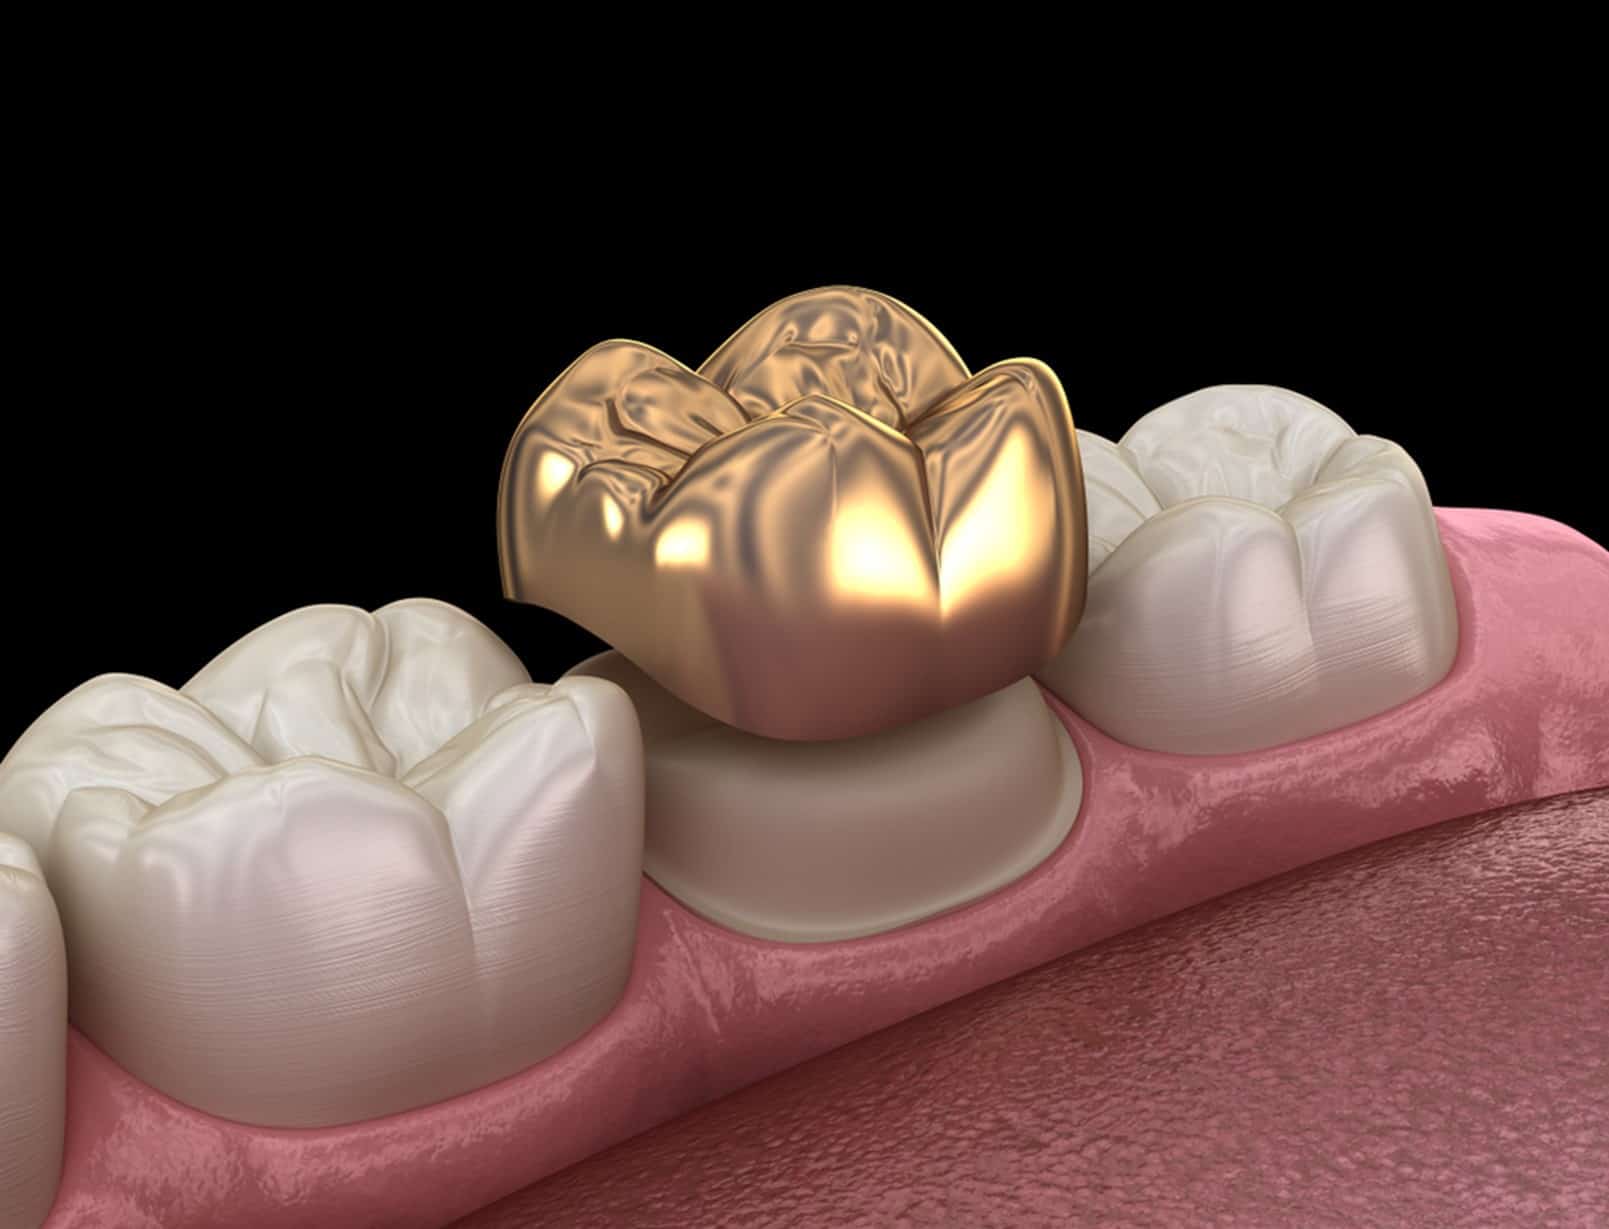 Macau dental crown price: What are the differences between the three types of dental crowns